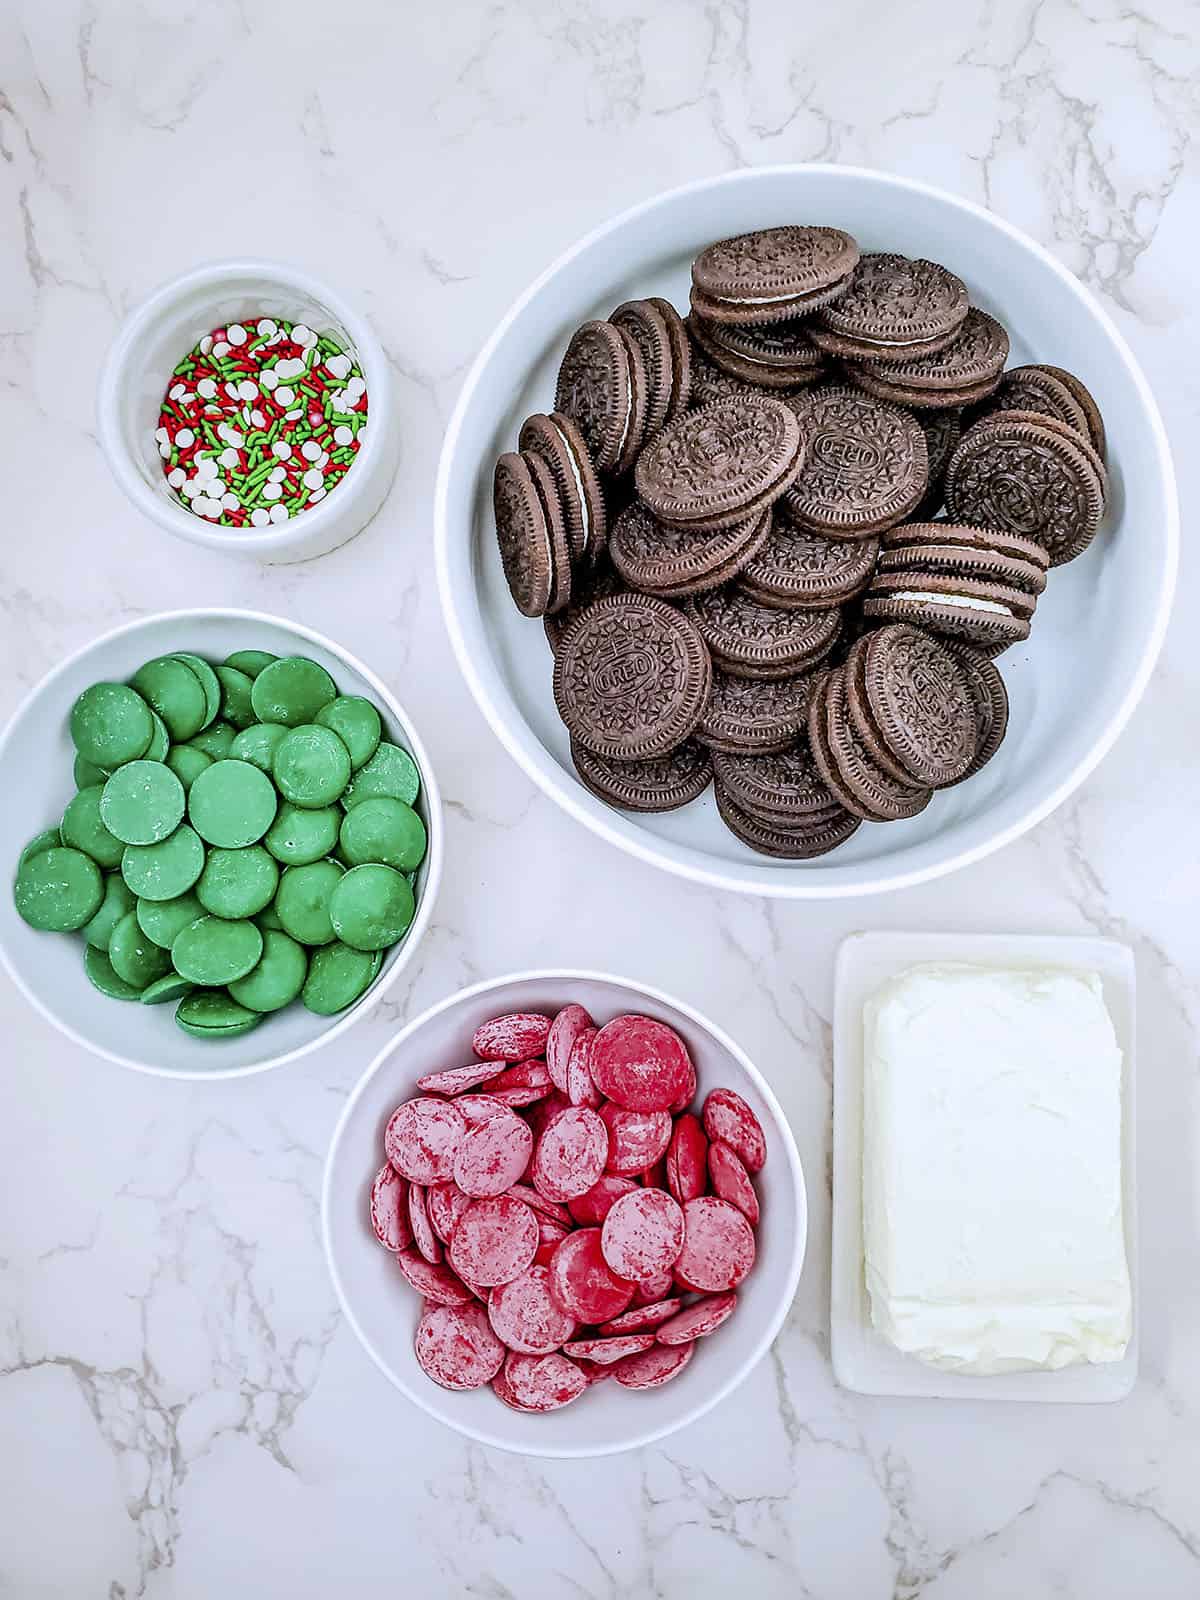 Ingredients for the cookie balls. Oreos, cream cheese, chocolate candy melts (red and green) and Christmas sprinkles.